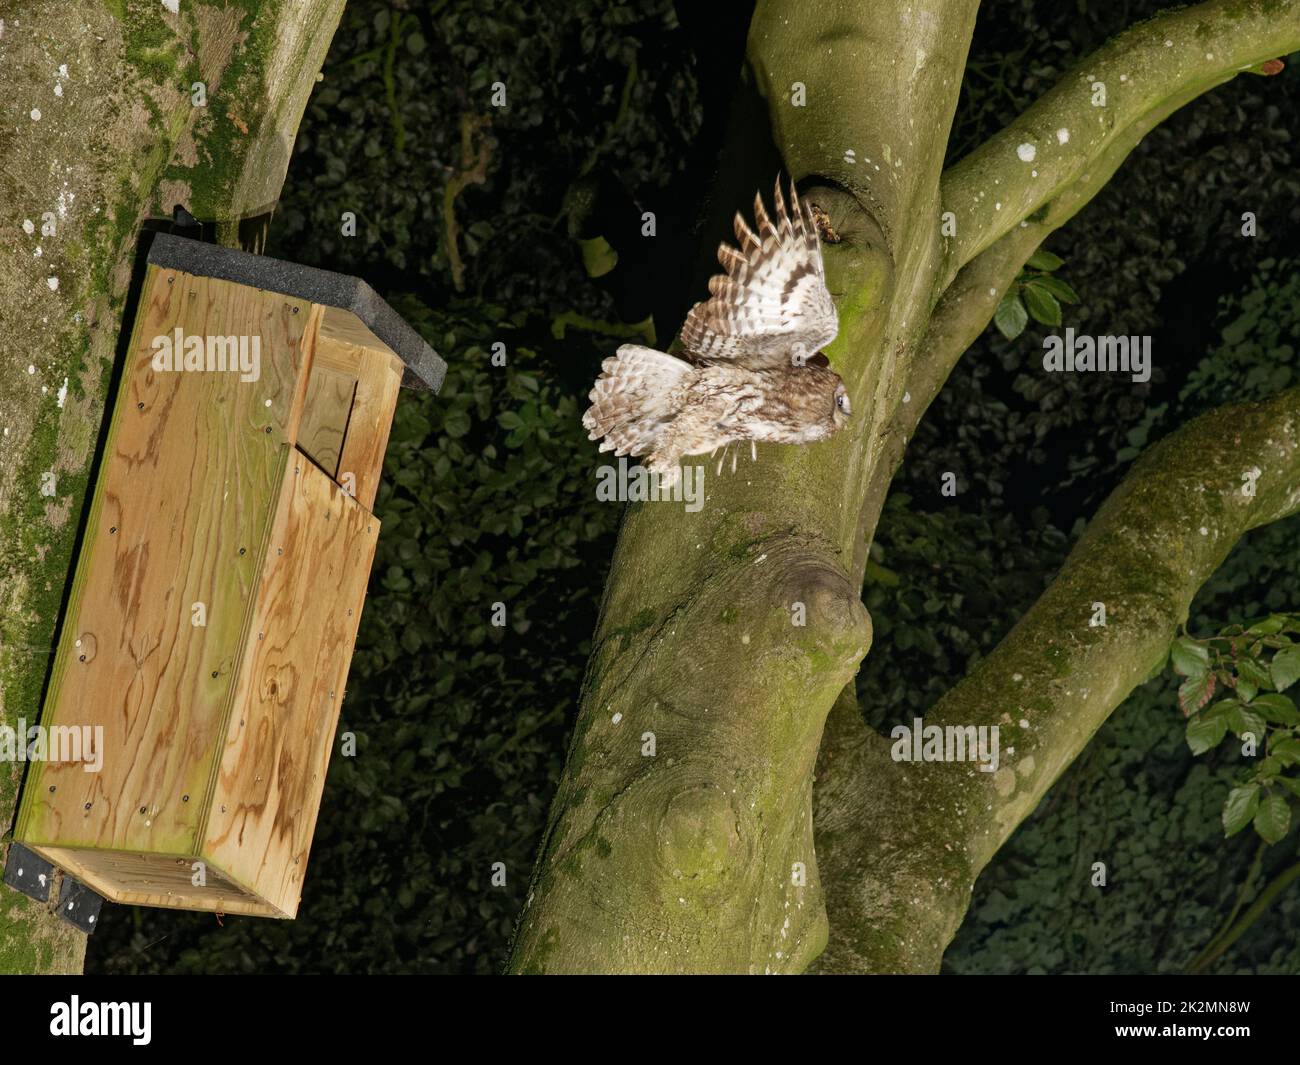 Tawny owl (Strix aluco) flying from a nest box at night after feeding its chick, Wiltshire garden, UK, May. Stock Photo